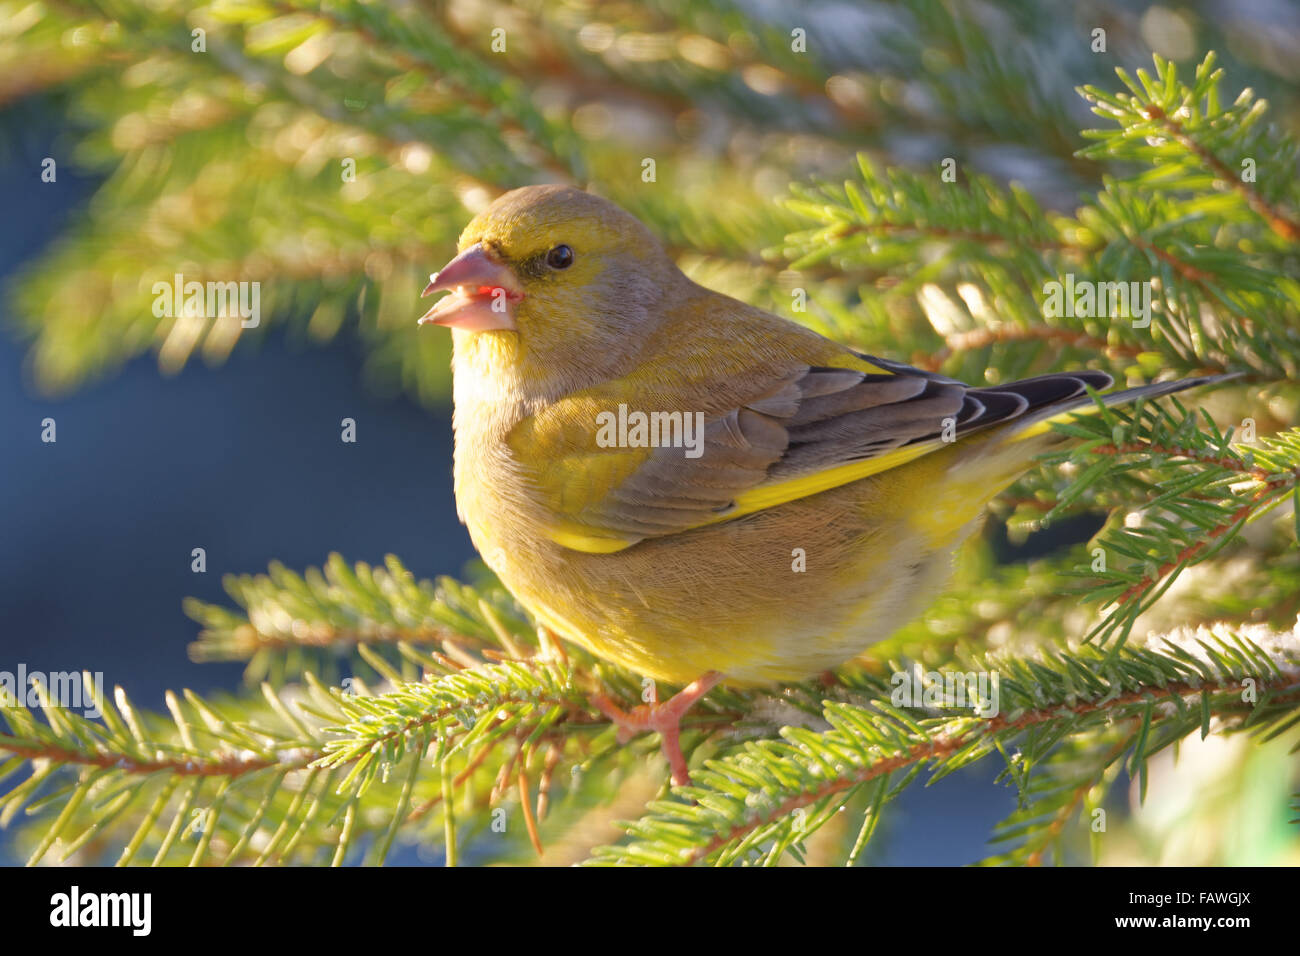 Greenfinch (Chloris chloris) is a small passerine bird in the finch family. Stock Photo